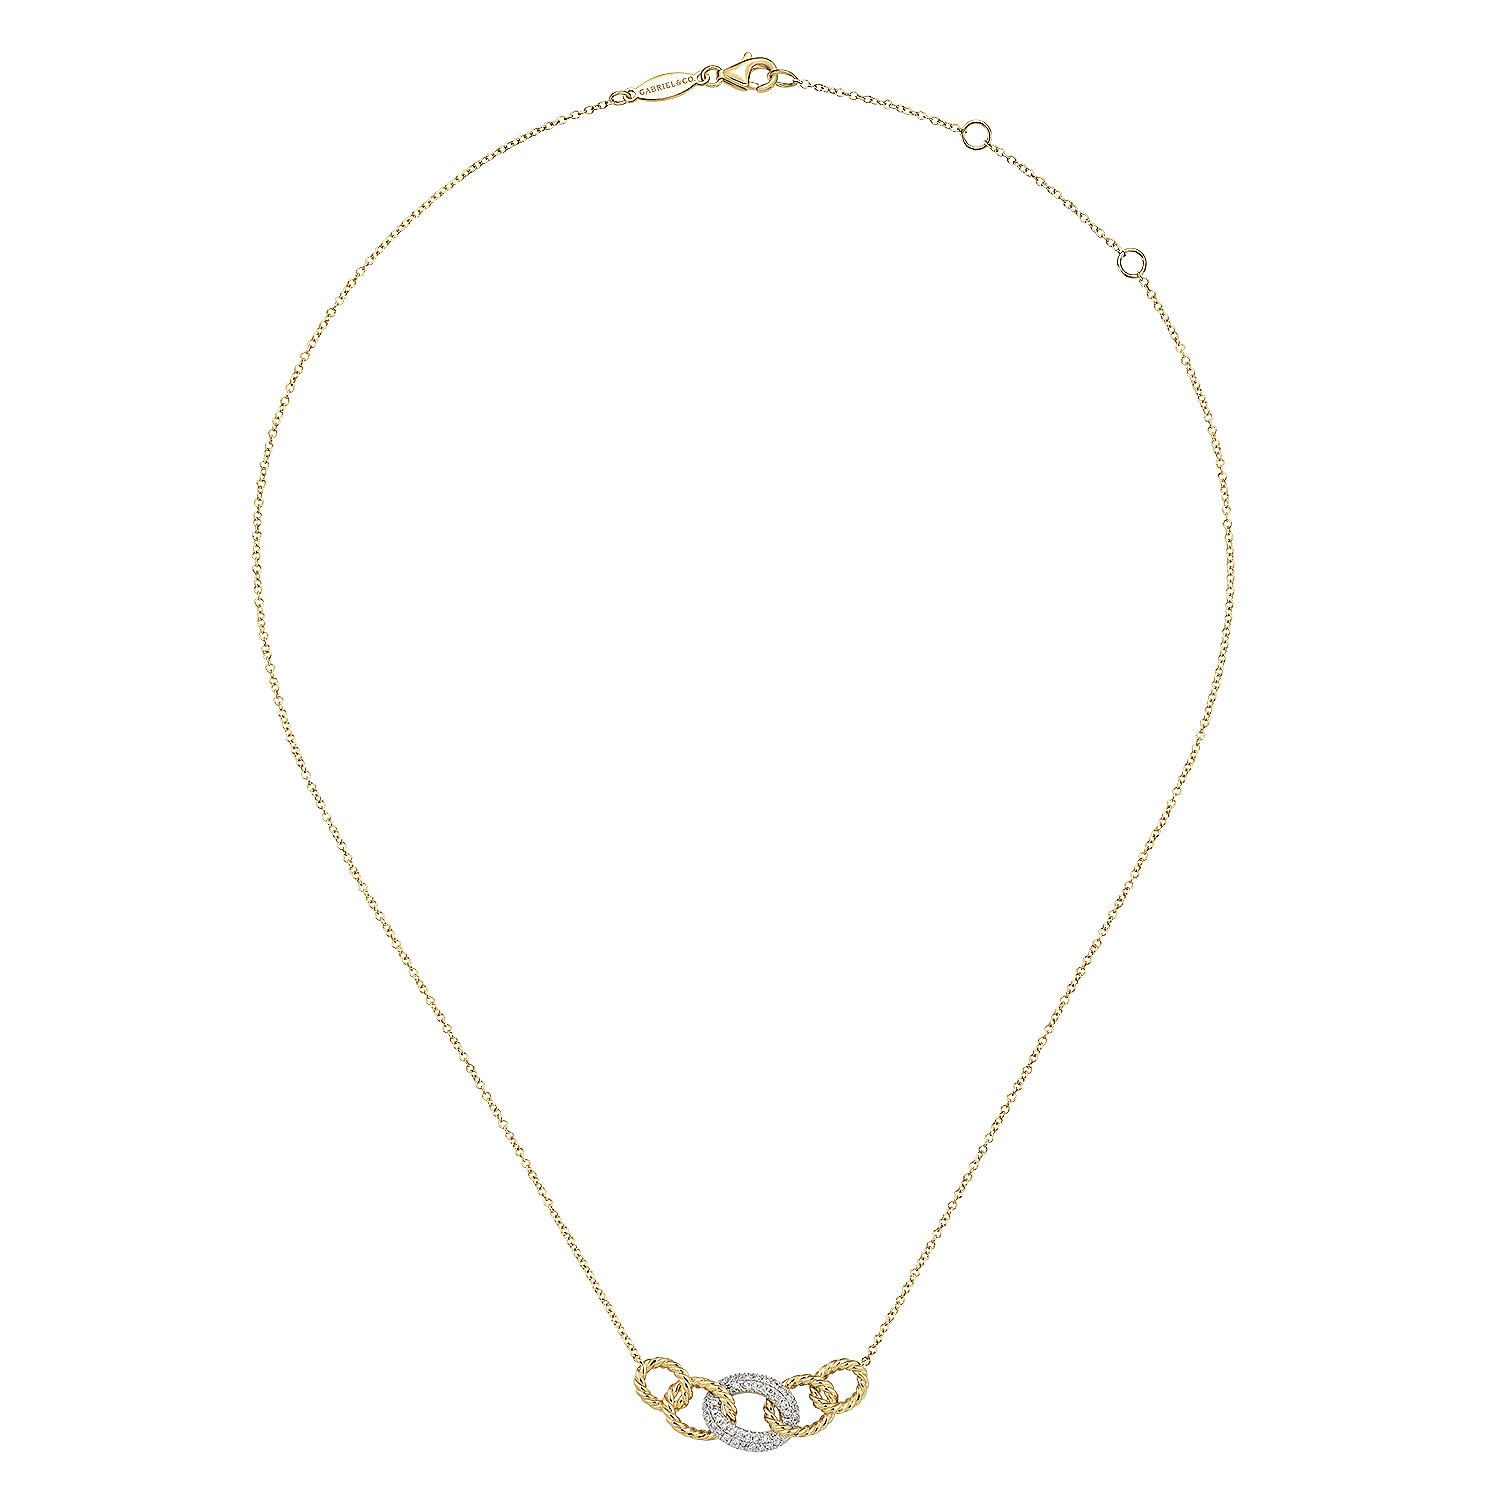 14K Yellow-White Gold Twisted Rope Link Necklace with Pave Diamond Link Station - 0.21 ct - Shot 2